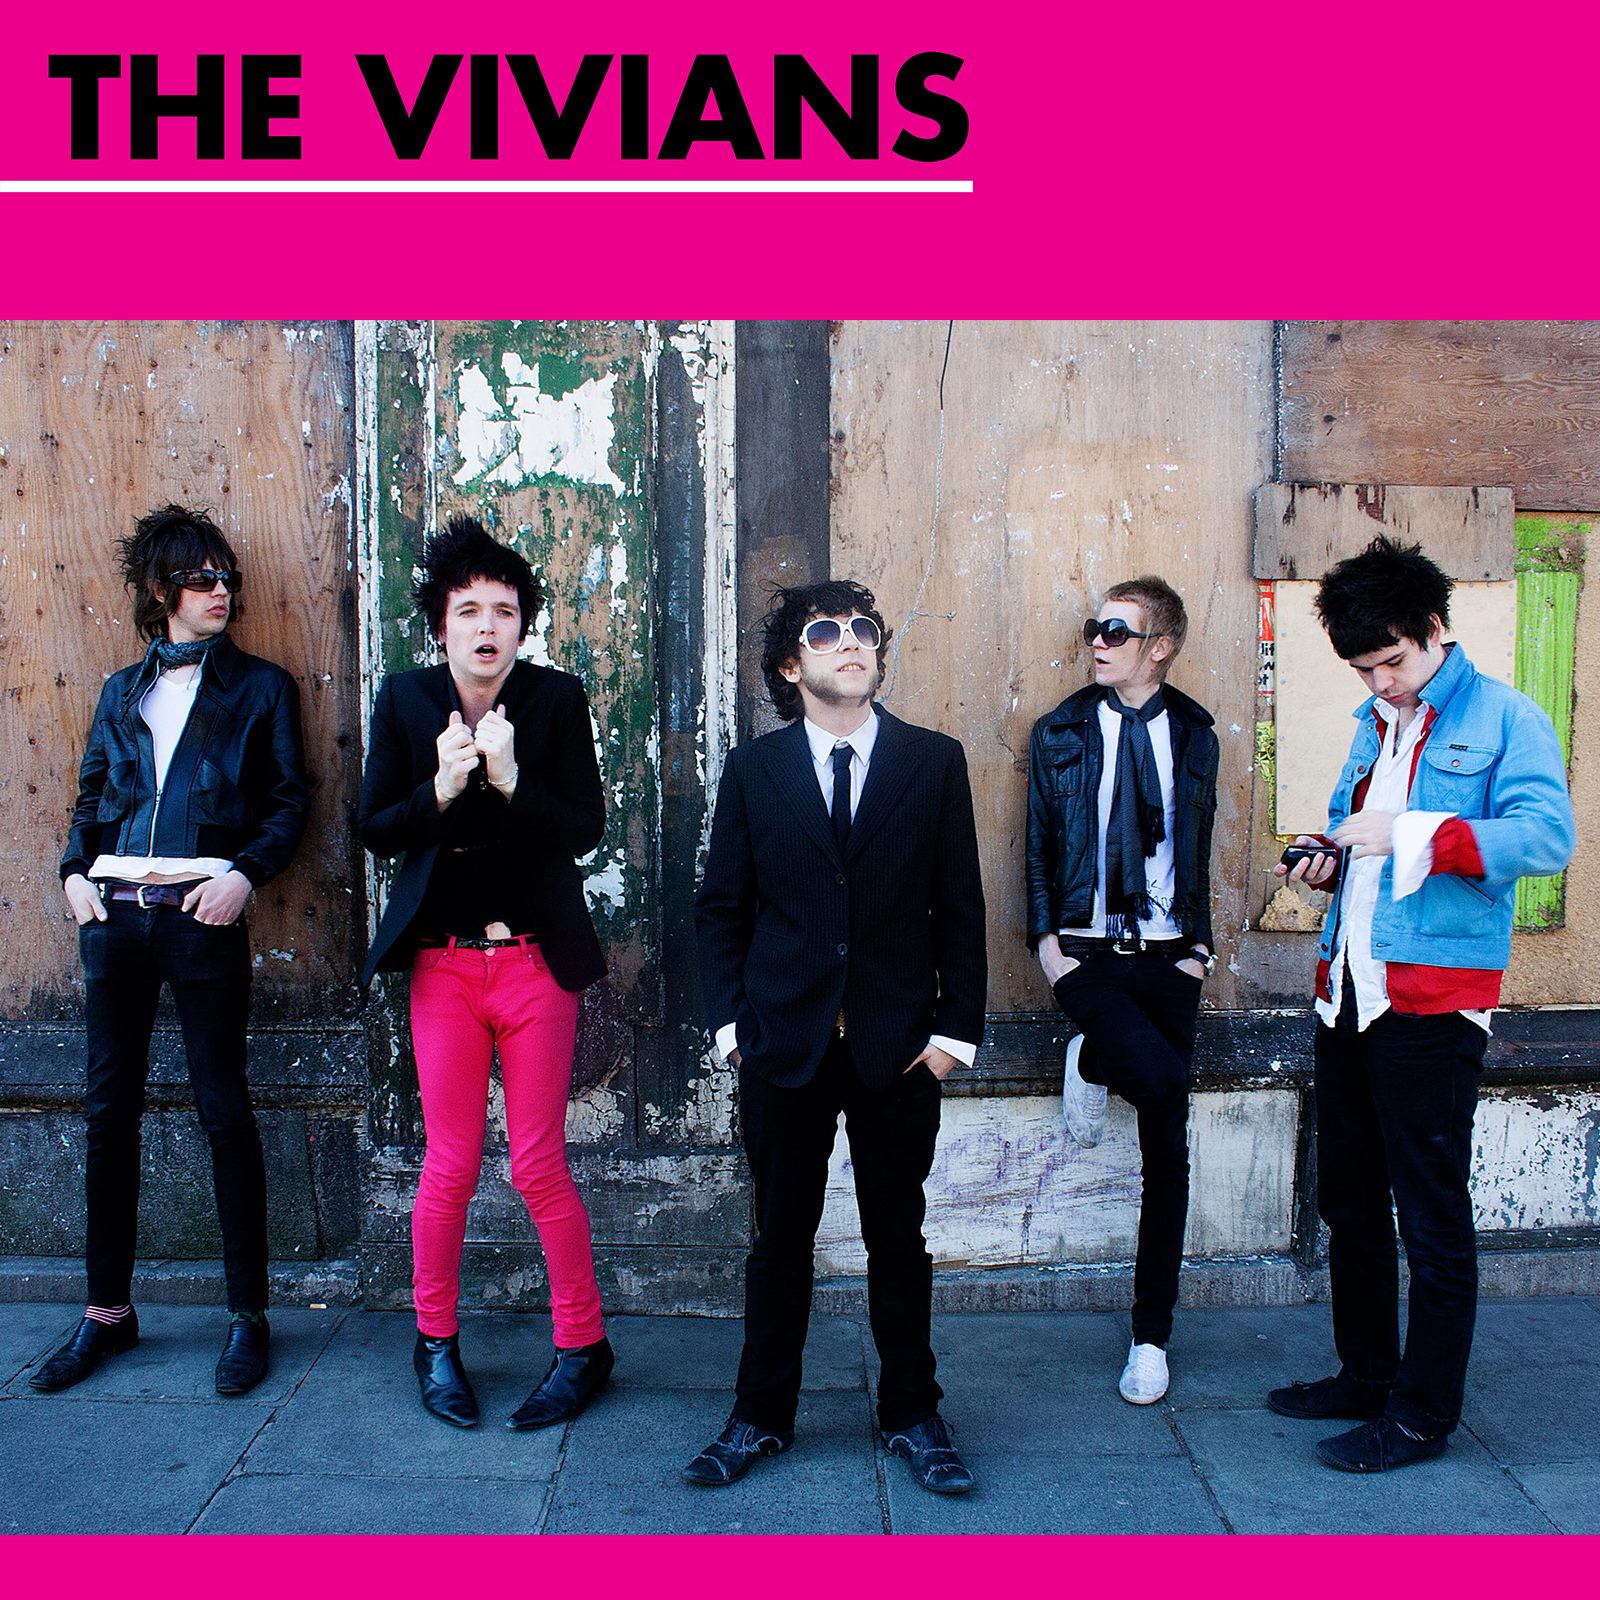 The Vivians – “Divided We Stand”